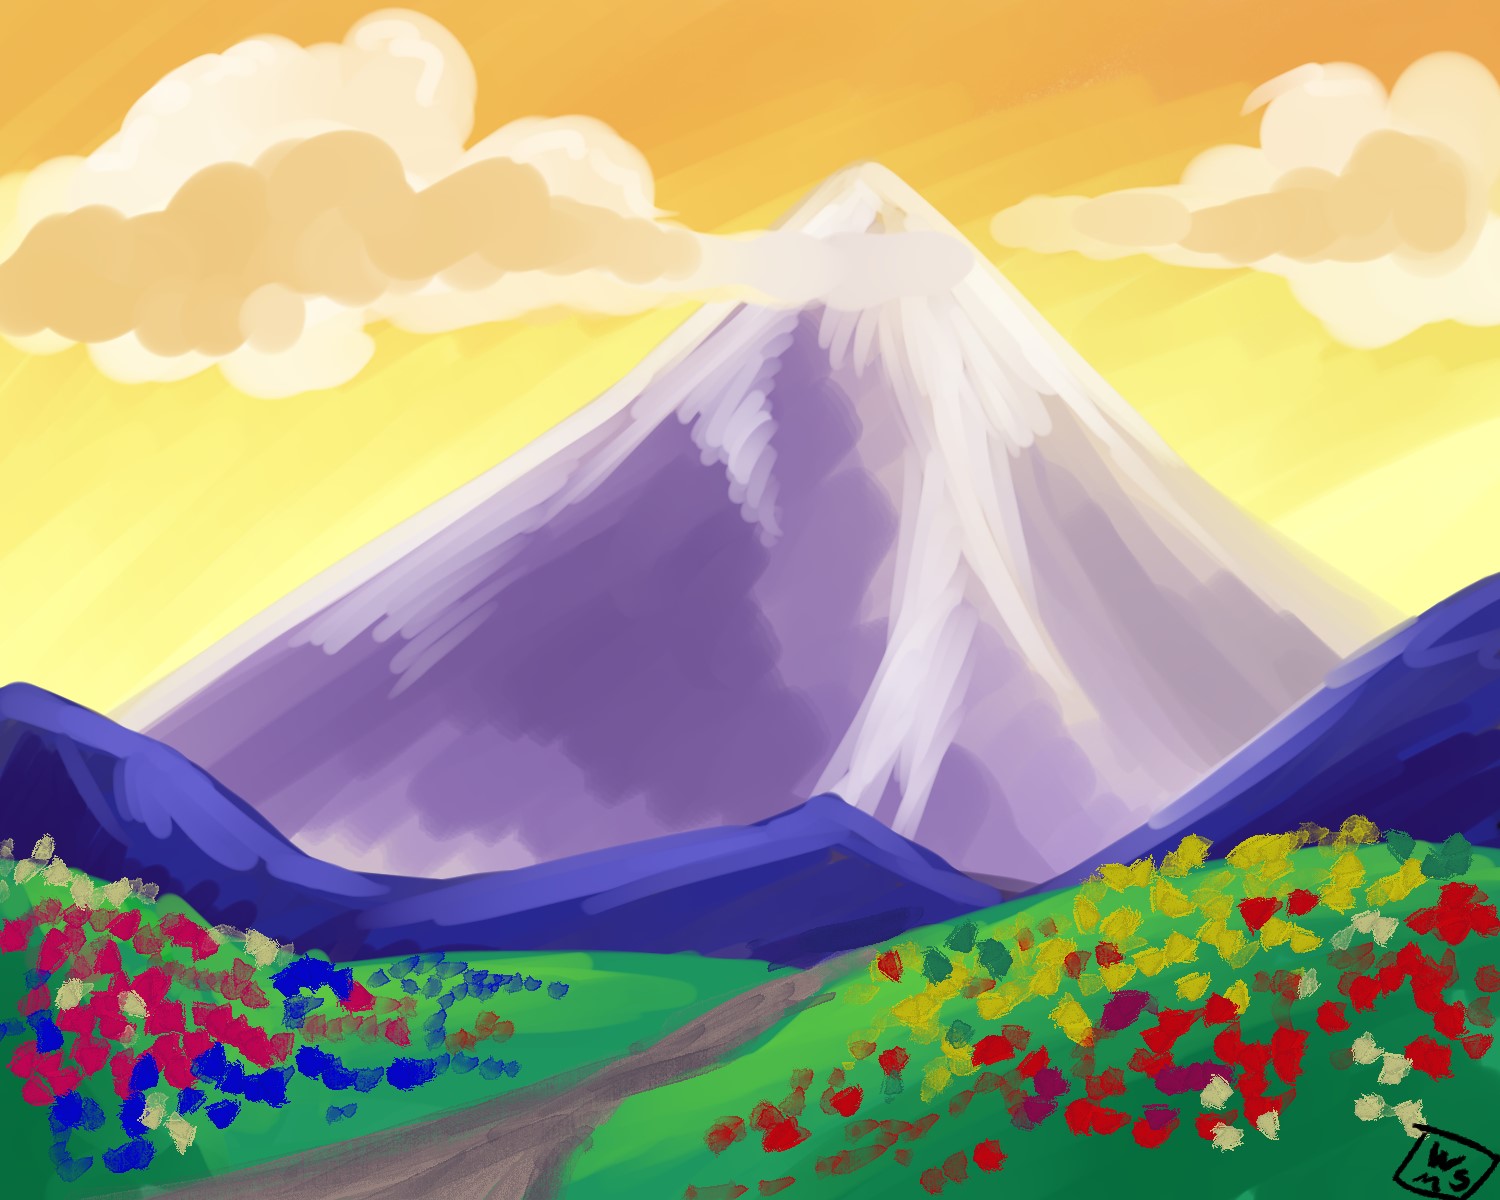 Painting of meadow with sun setting behind a mountain